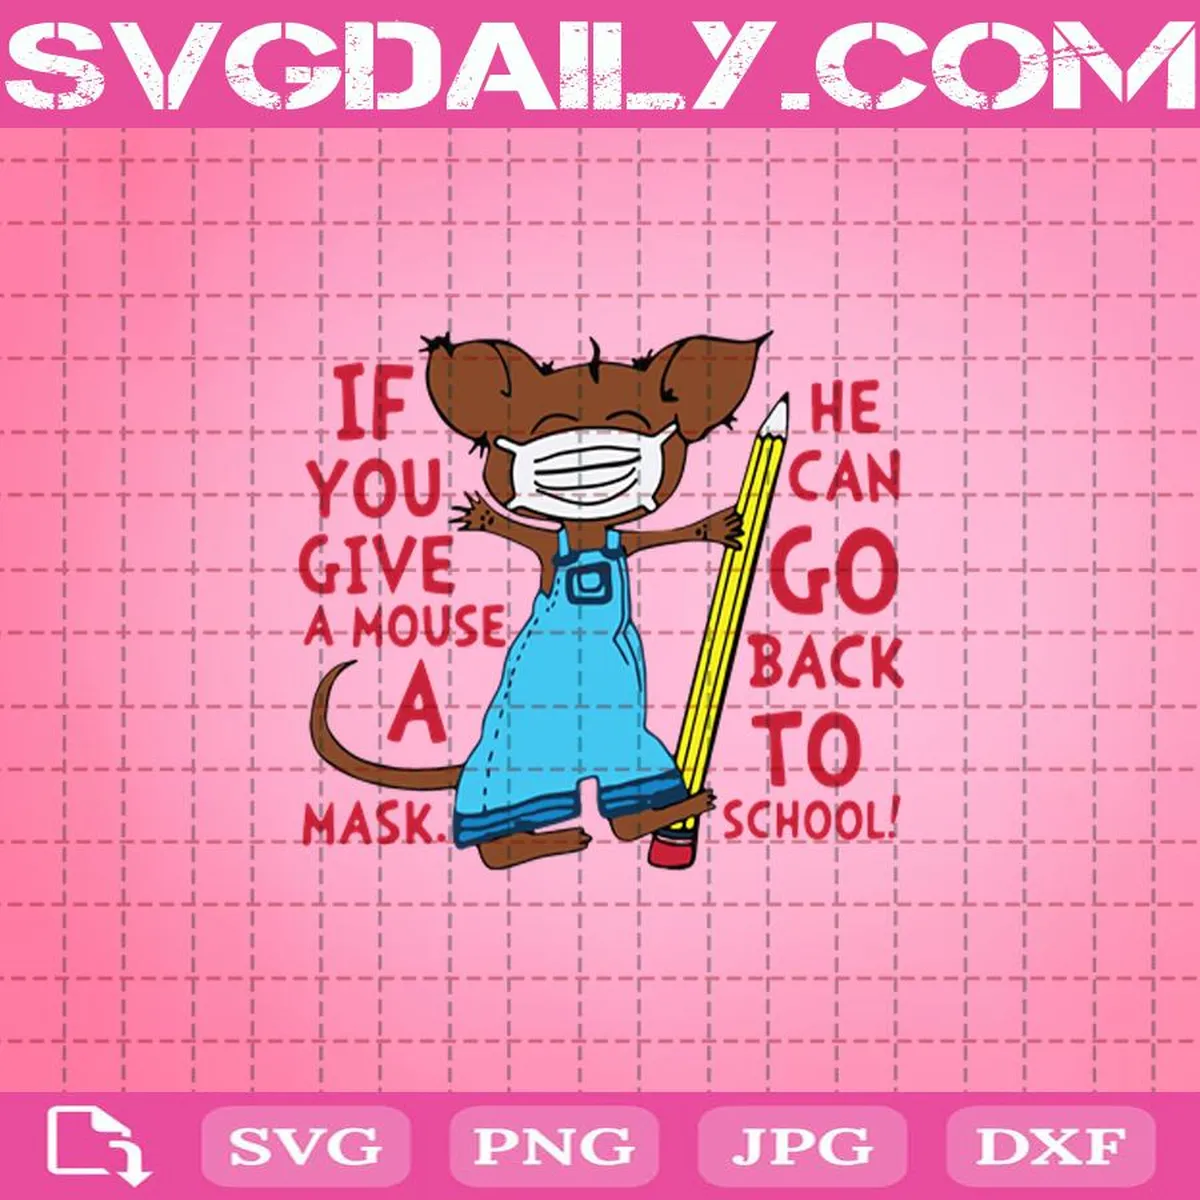 If You Give A Mouse A Mask He Can Go Back To School Svg, Mouse With Face Mask Svg, Face Mask Svg